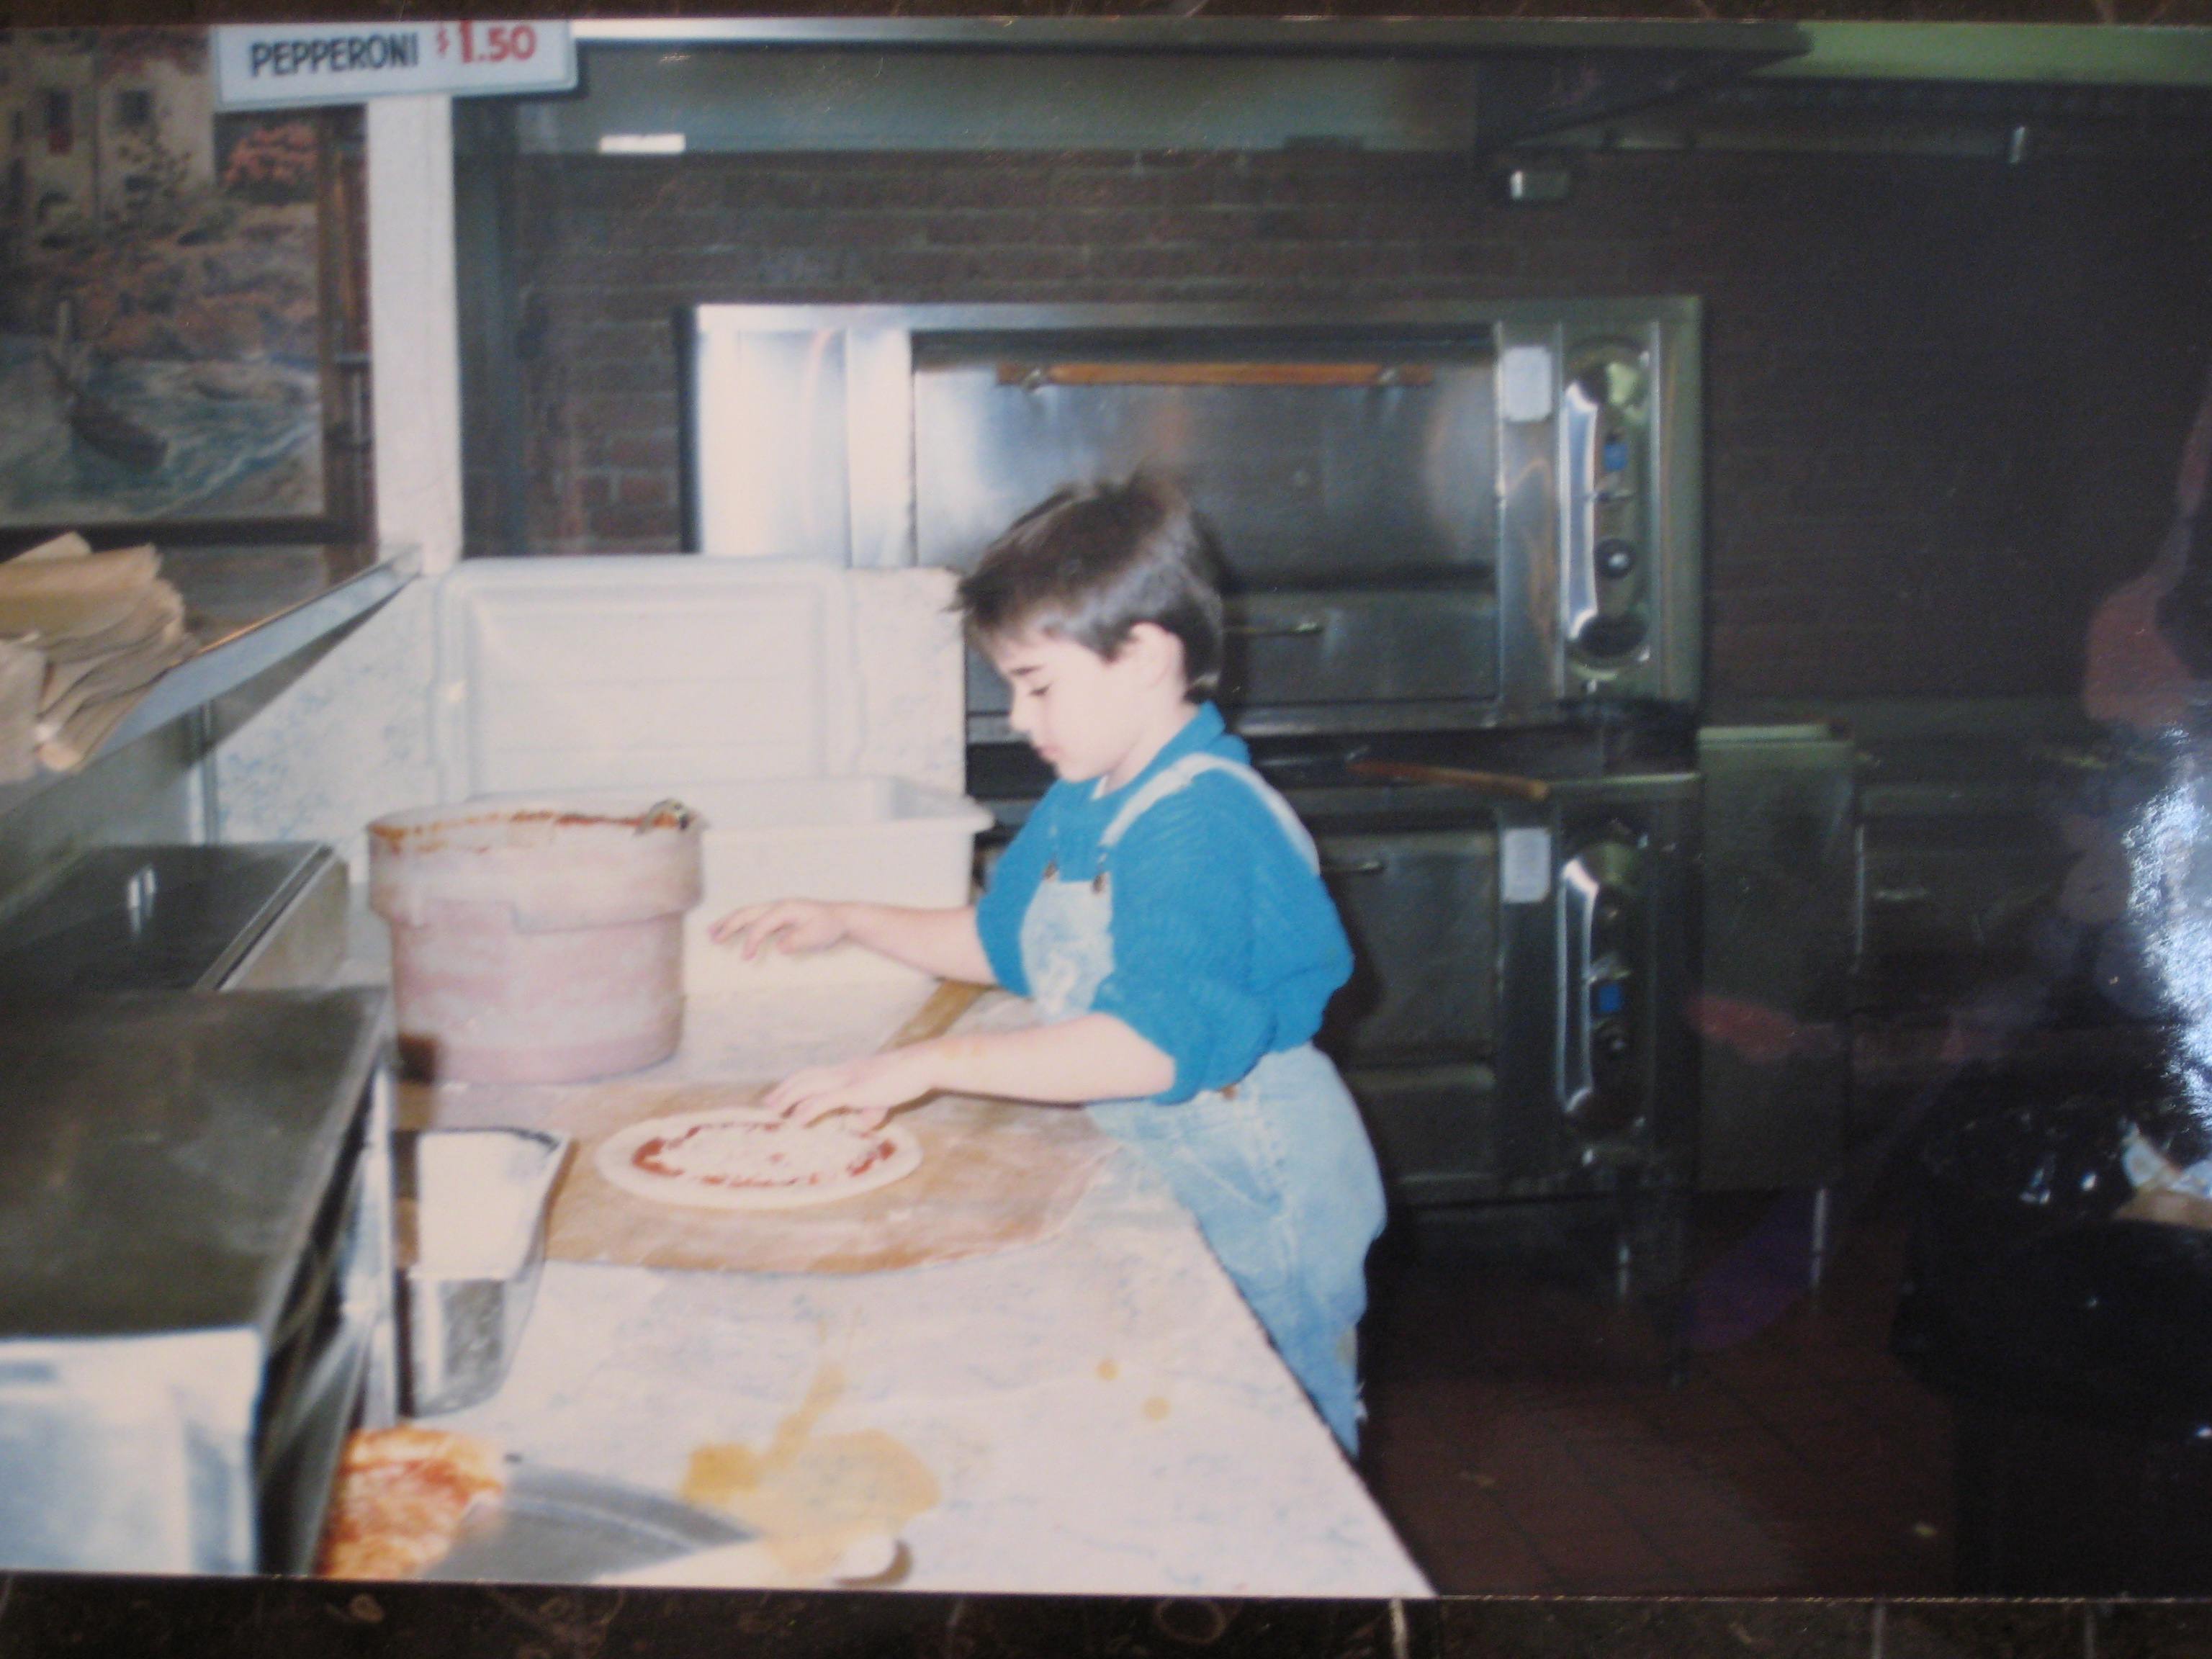 Arturo's Ristorante owner Dom Fabiano making pizza at five-years-old at his dad's restaurant.